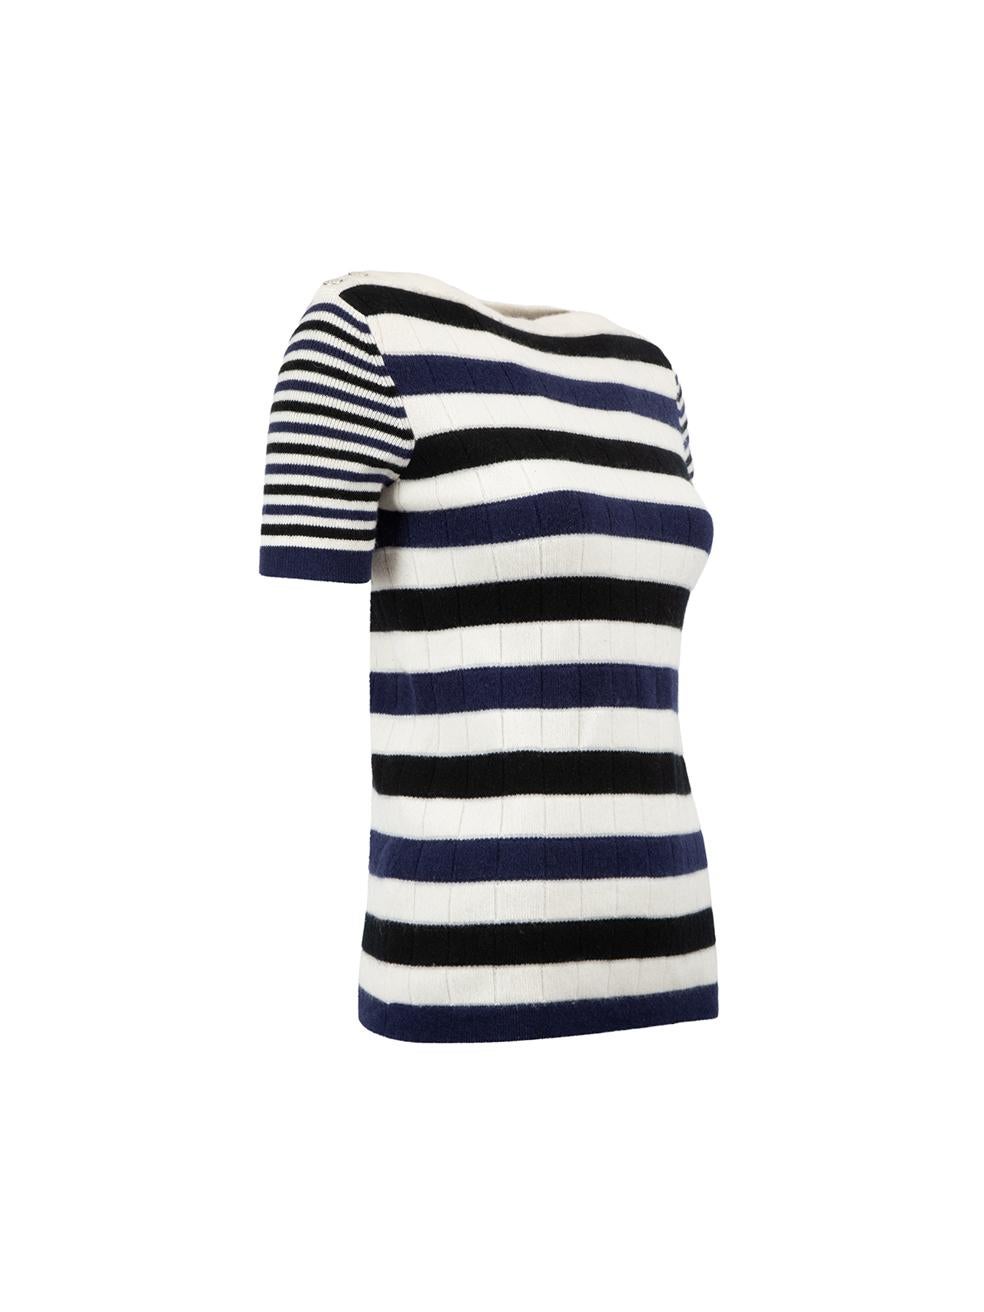 CONDITION is Very good. Hardly any visible wear to top is evident on this used Chanel designer resale item.



Details


Black, white and blue

Cashmere

Knitted top

Short sleeved

Striped pattern

Boat neckline

2x Buttons on each